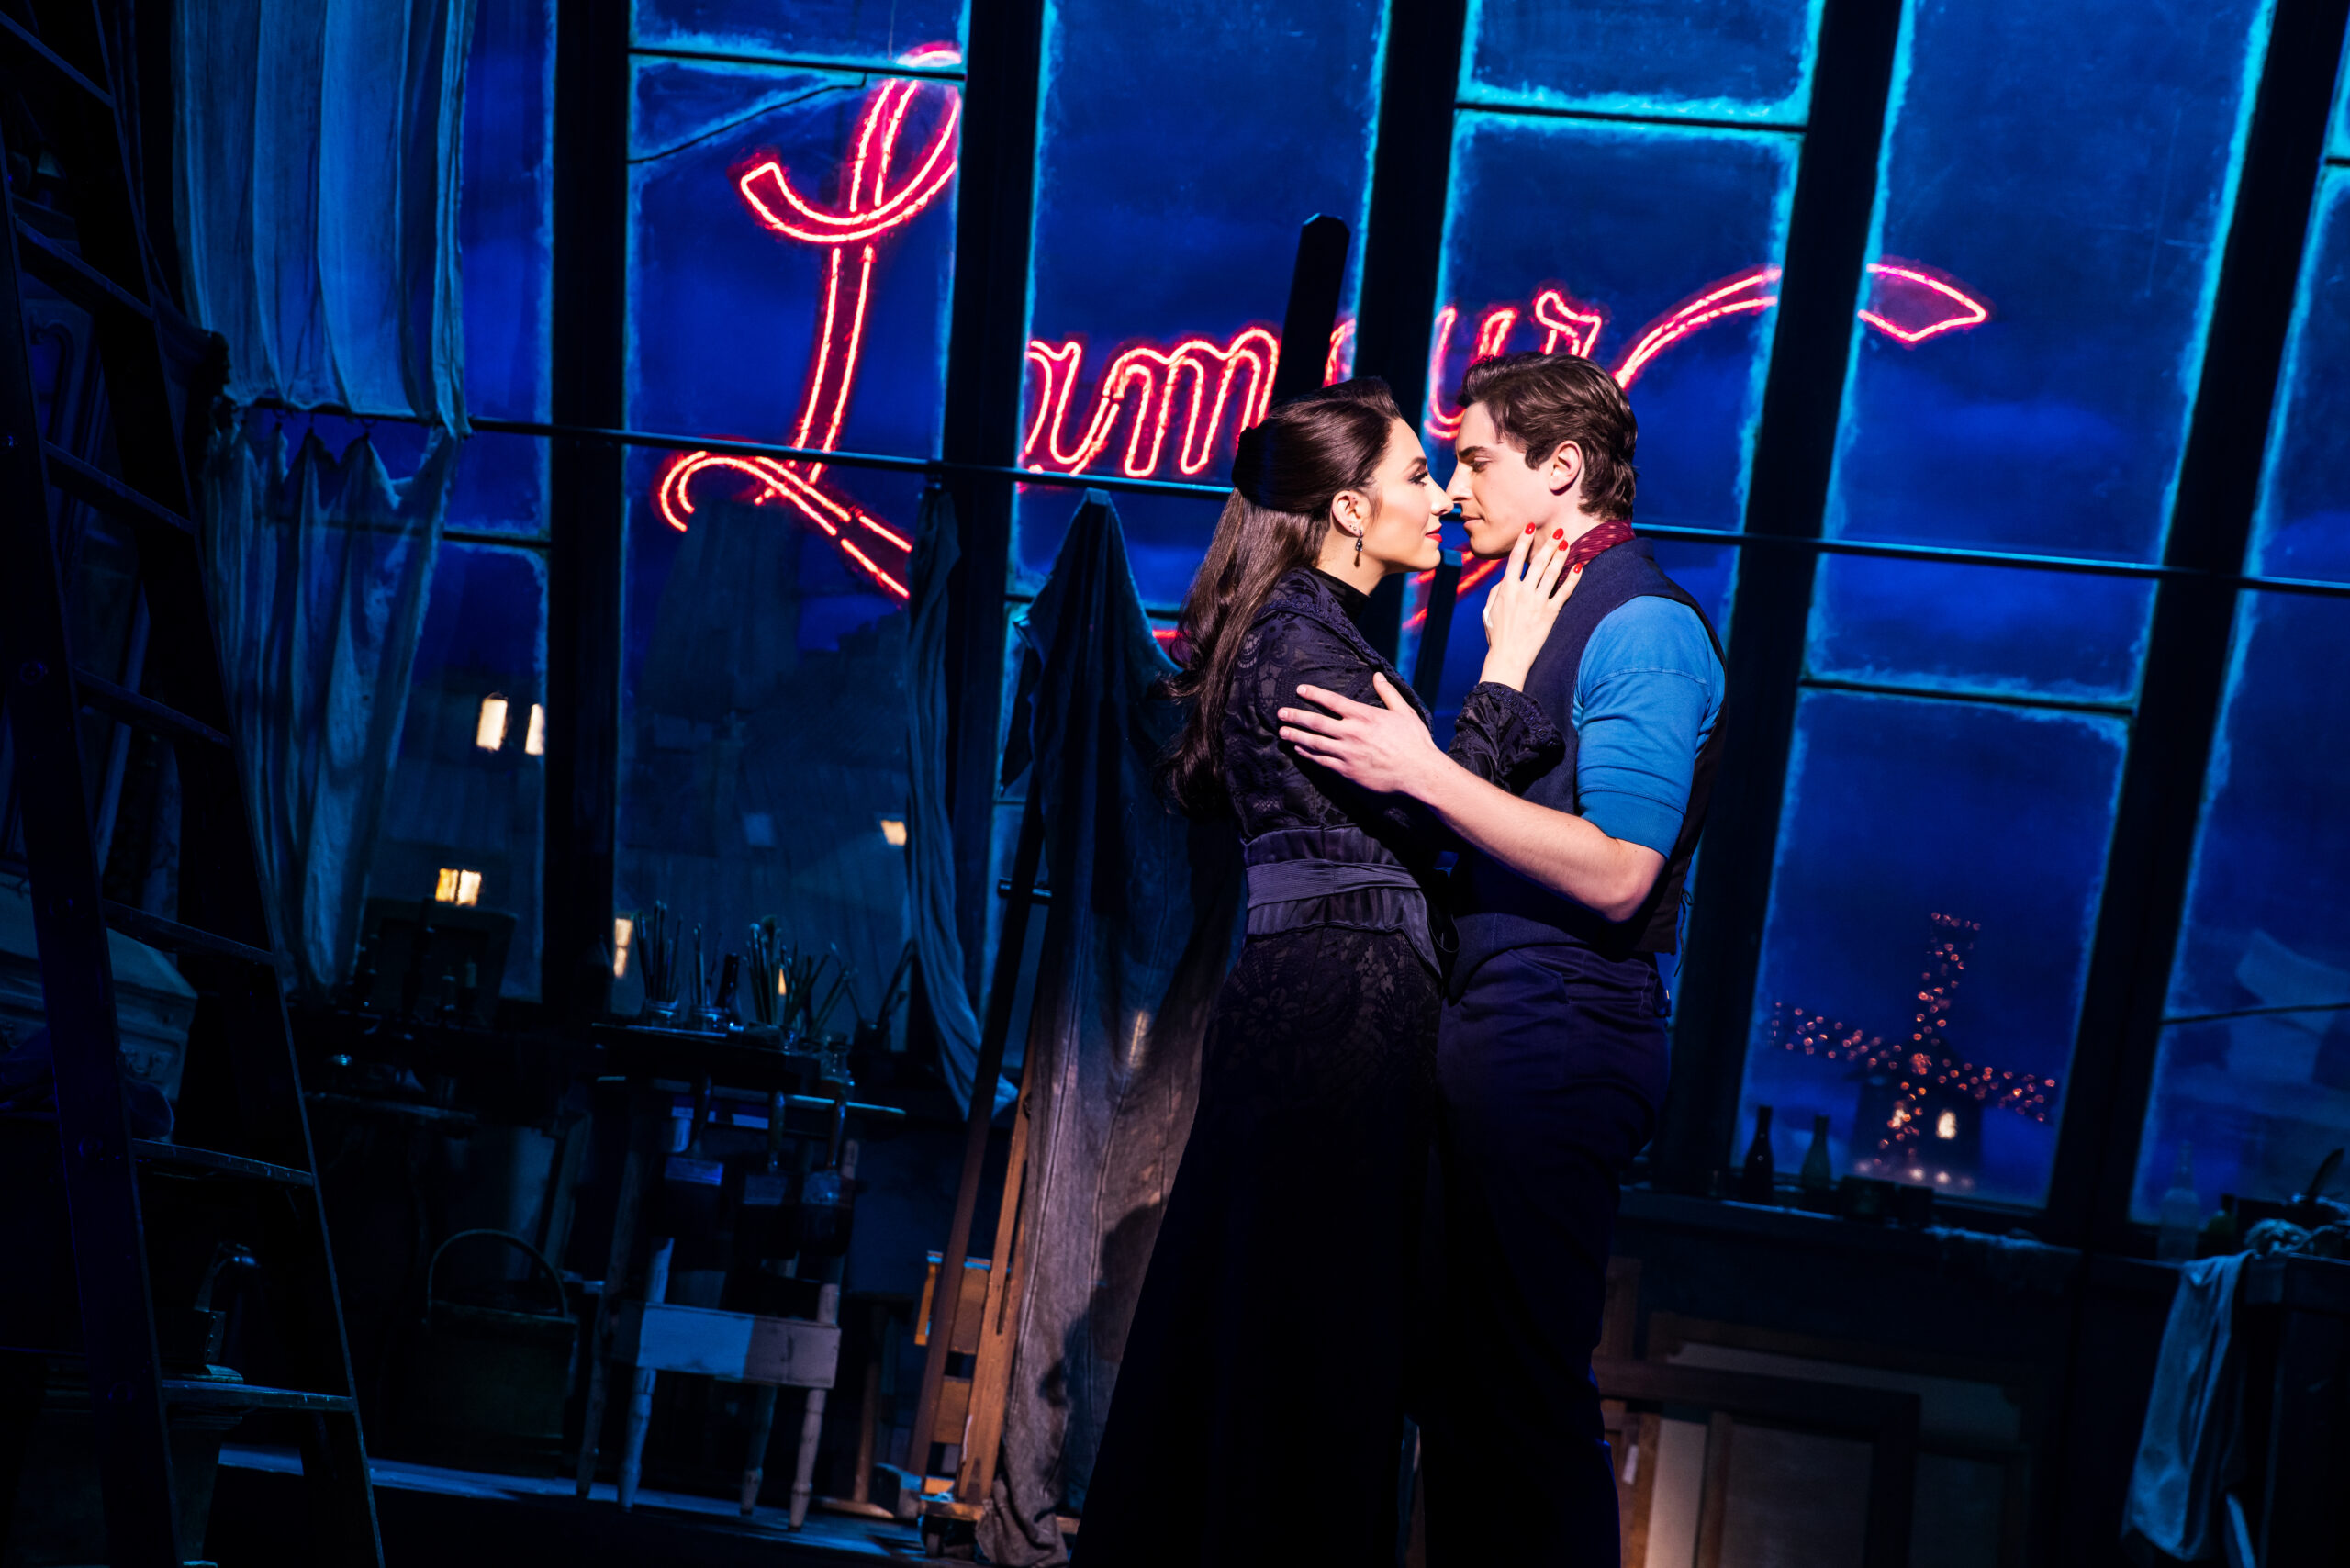 Ashley Loren and Derek Klena in Moulin Rouge! The Musical. Photo by Evan Zimmerman for MurphyMade.